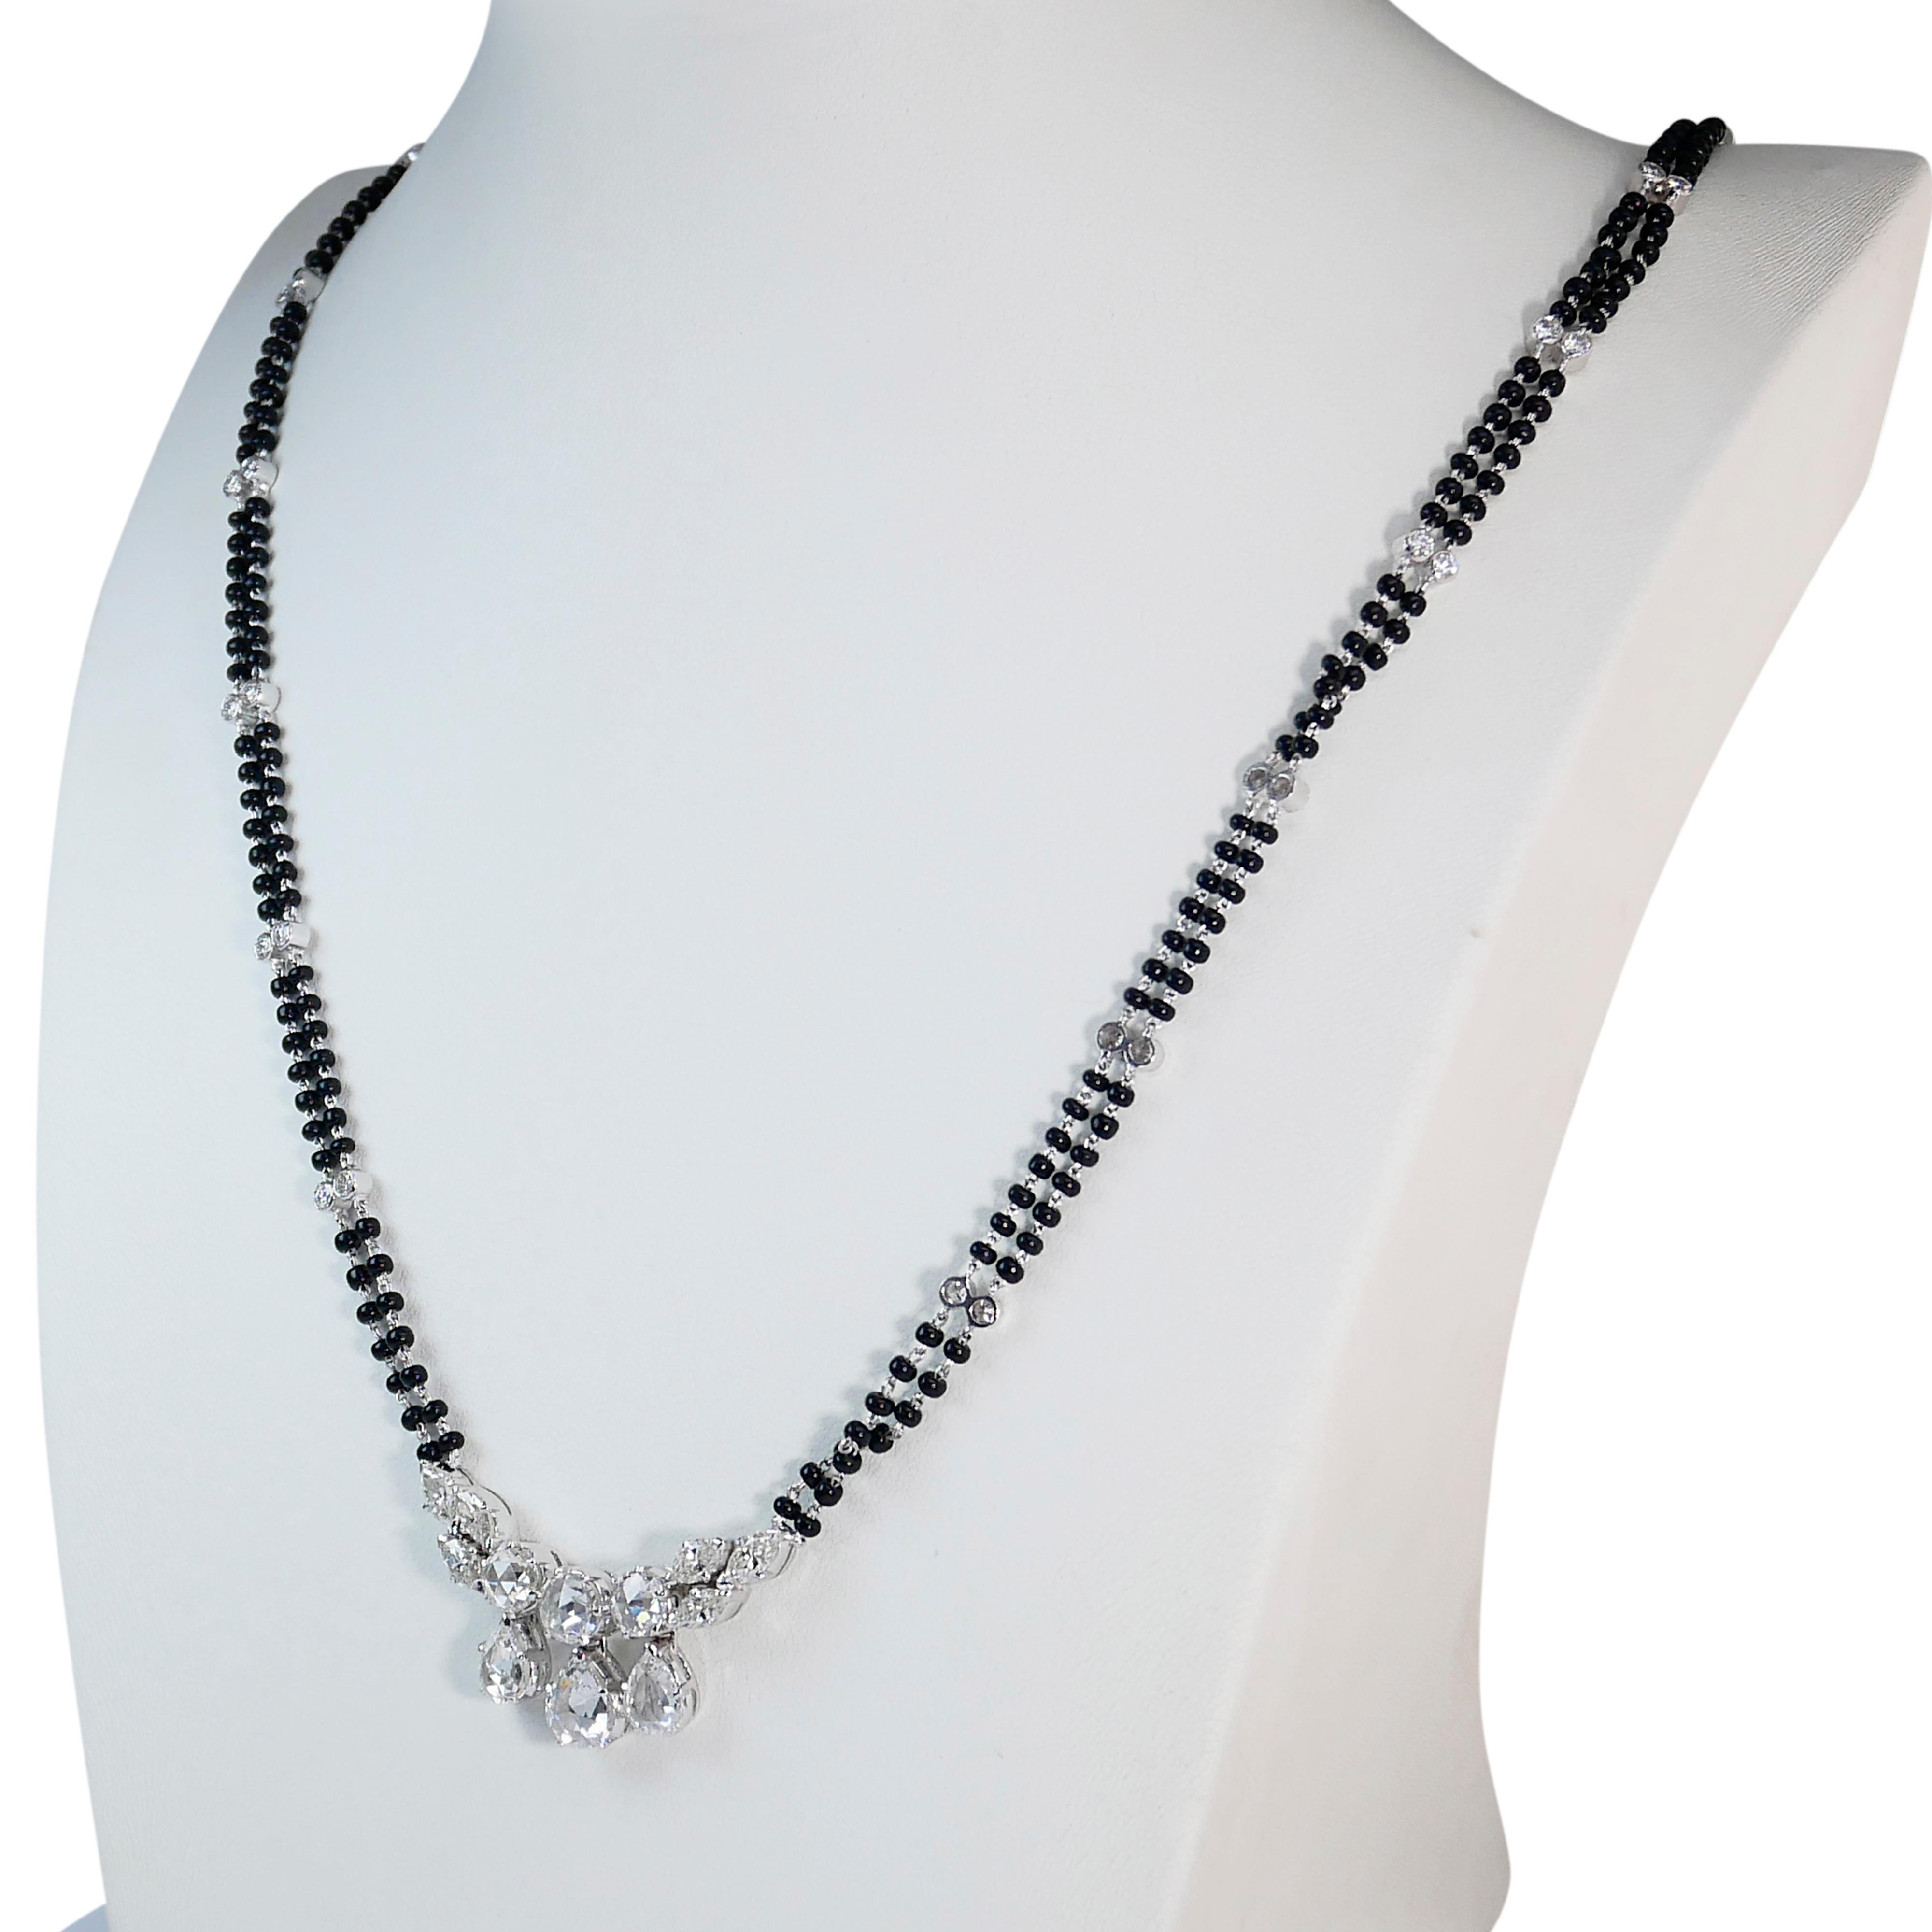 Glamorous 8.02 ct Onyx and Diamond Necklace in 18k White Gold - IGI Certified For Sale 2